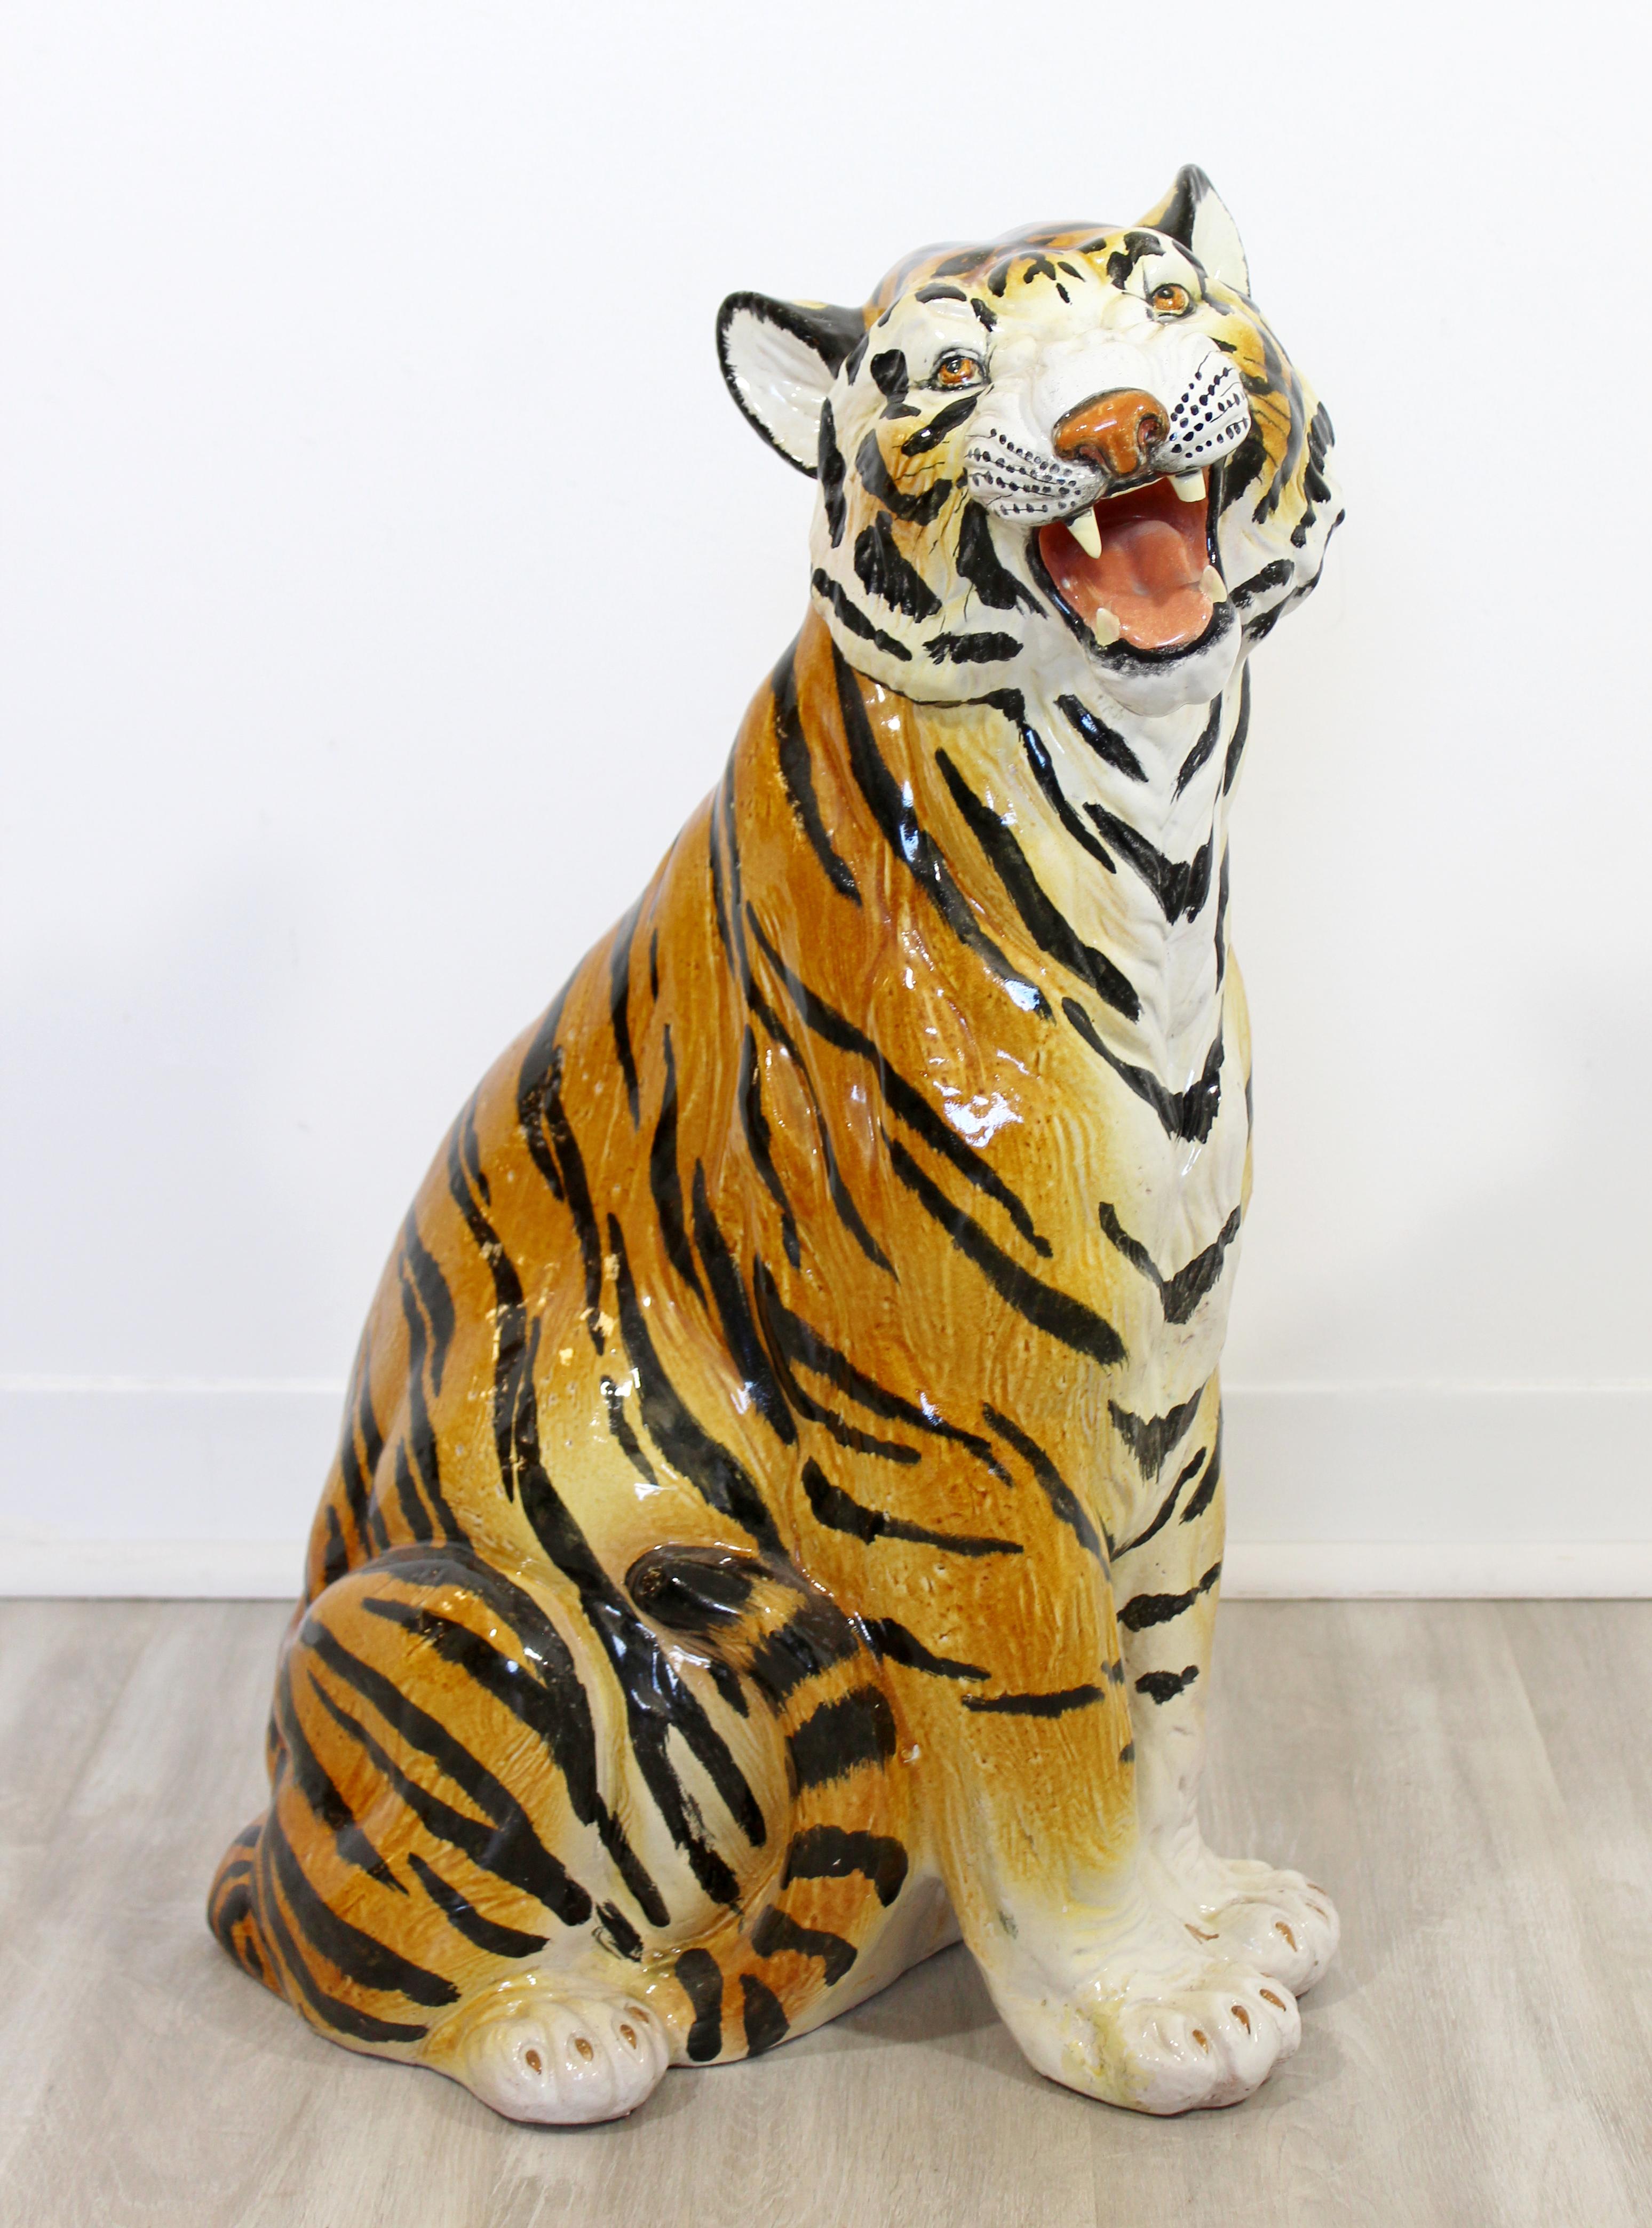 For your consideration is an expressive, hand painted porcelain floor sculpture of a roaring tiger, circa 1970s made in Italy. In good vintage condition with some chips in the glaze and a broken tooth. The dimensions are 15